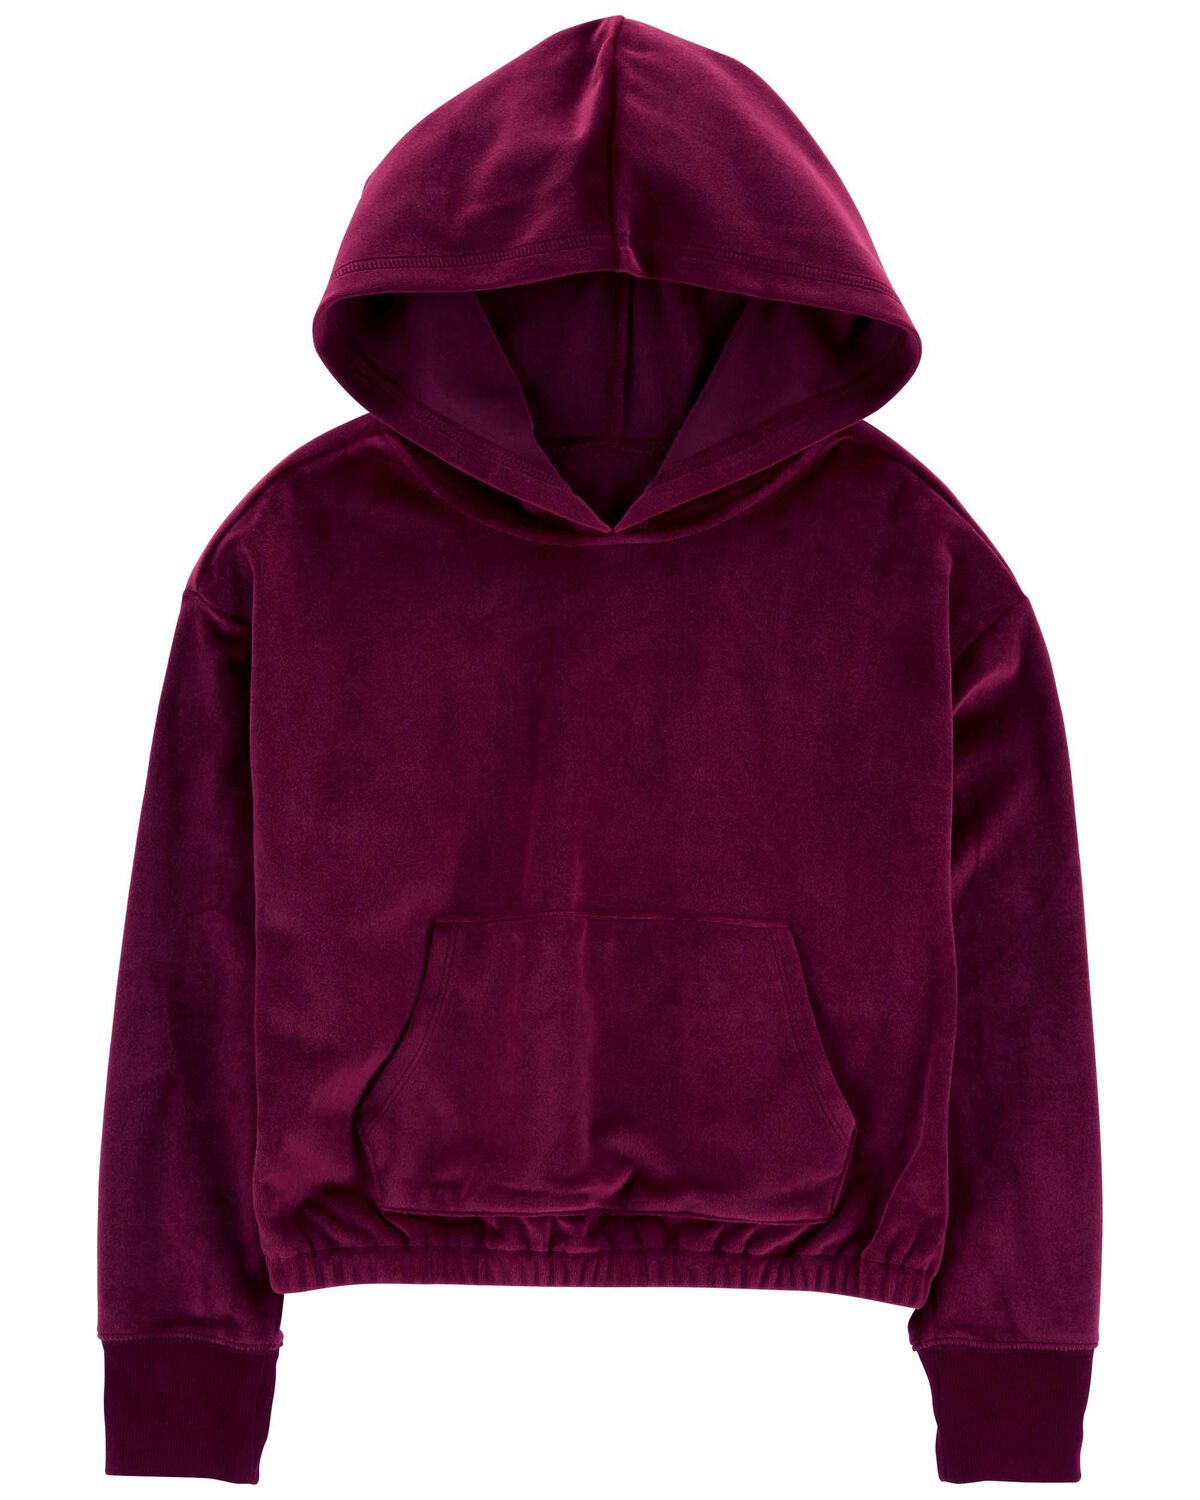 Red Kid Soft Velour Hooded Pullover | carters.com